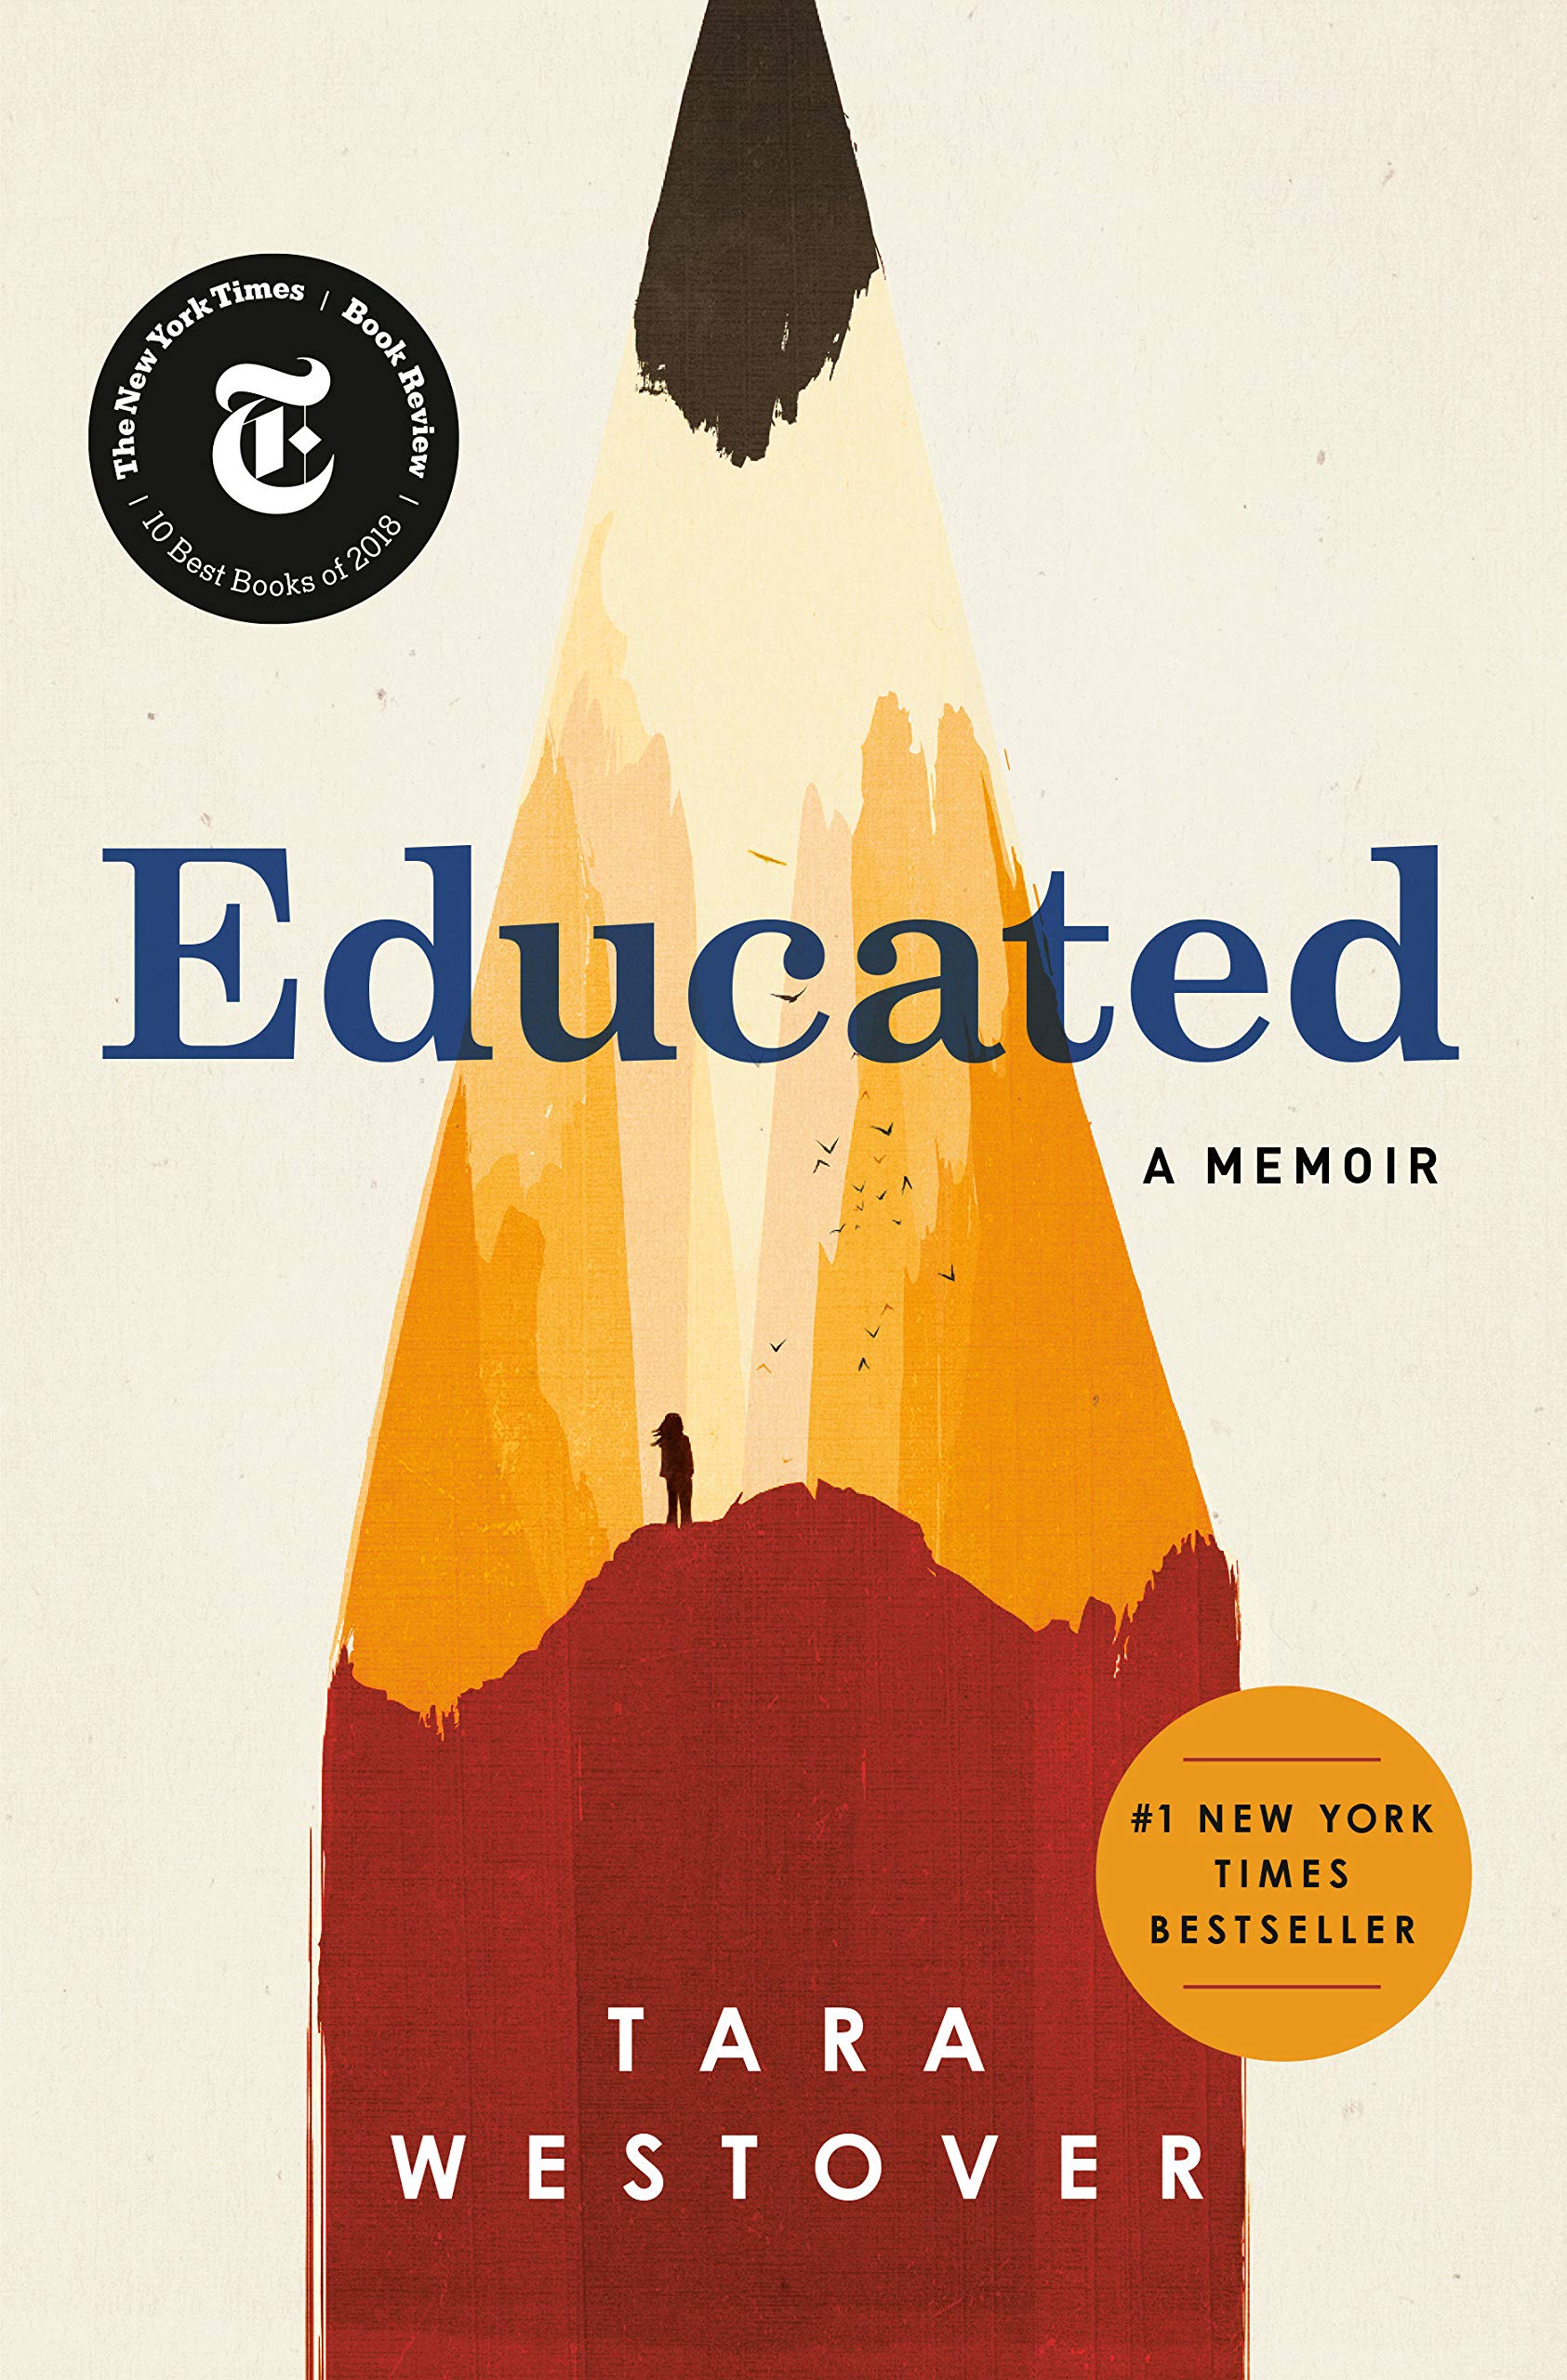 The book cover for Educated